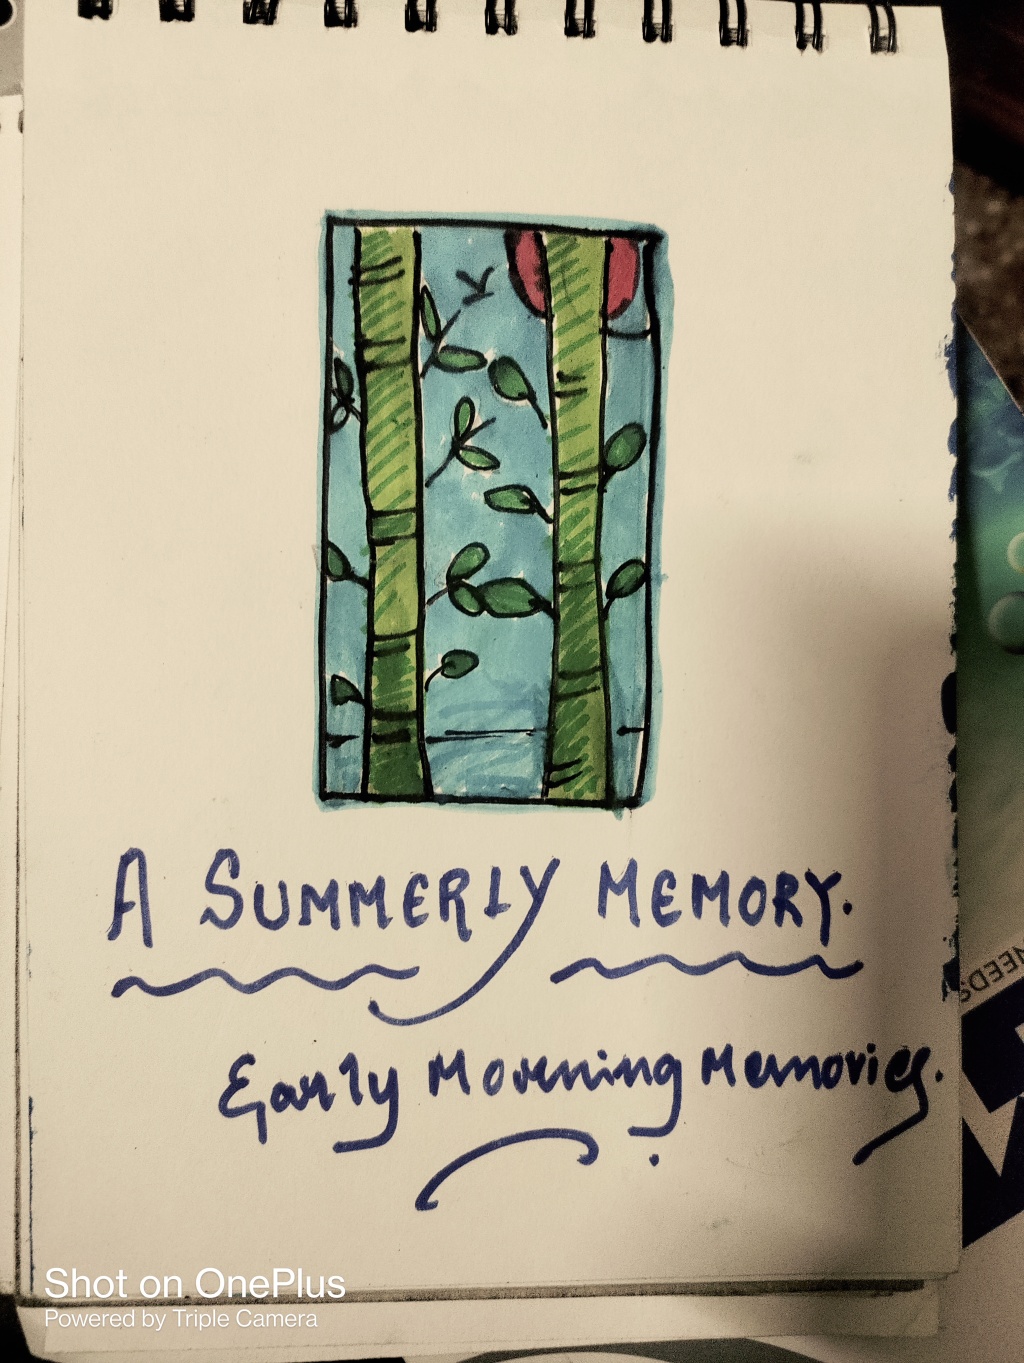 A Summerly Memory